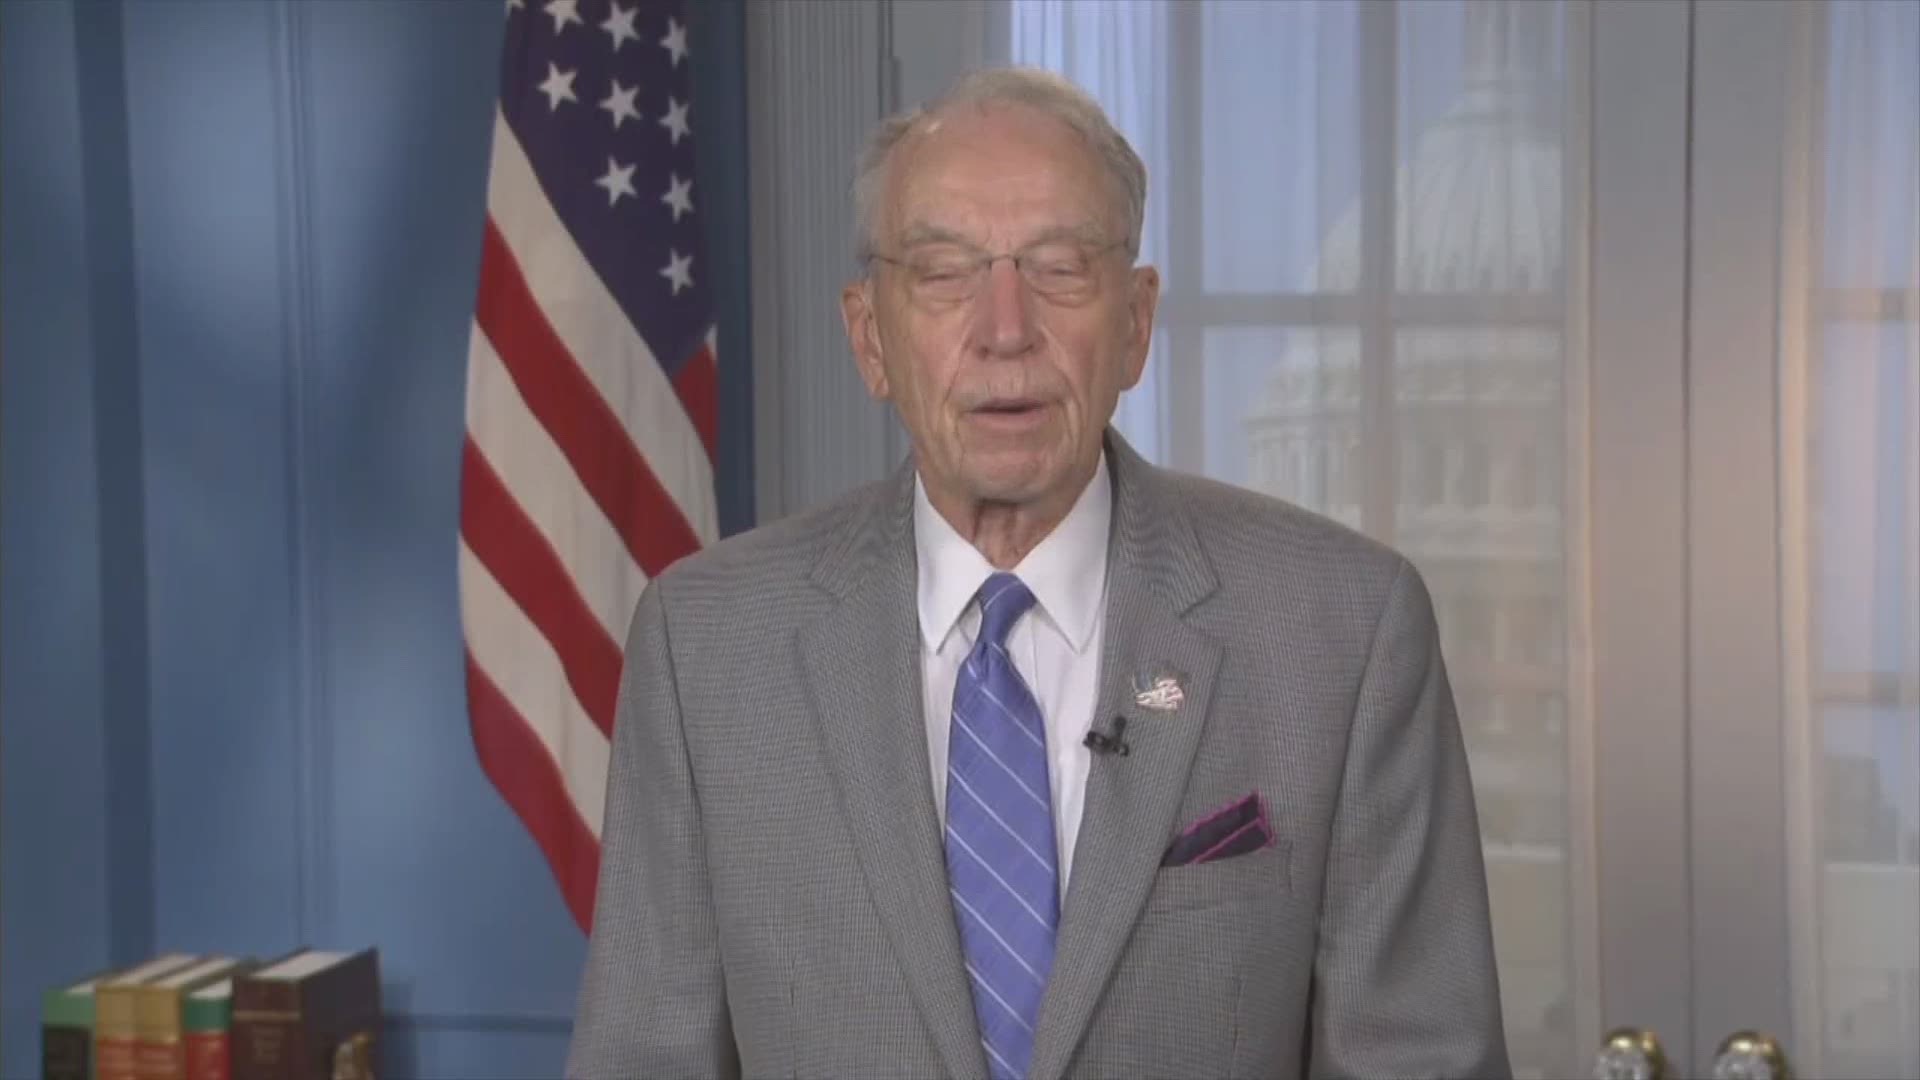 Sen. Chuck Grassley shared his thoughts on a proposal for more economic relief from COVID-19.